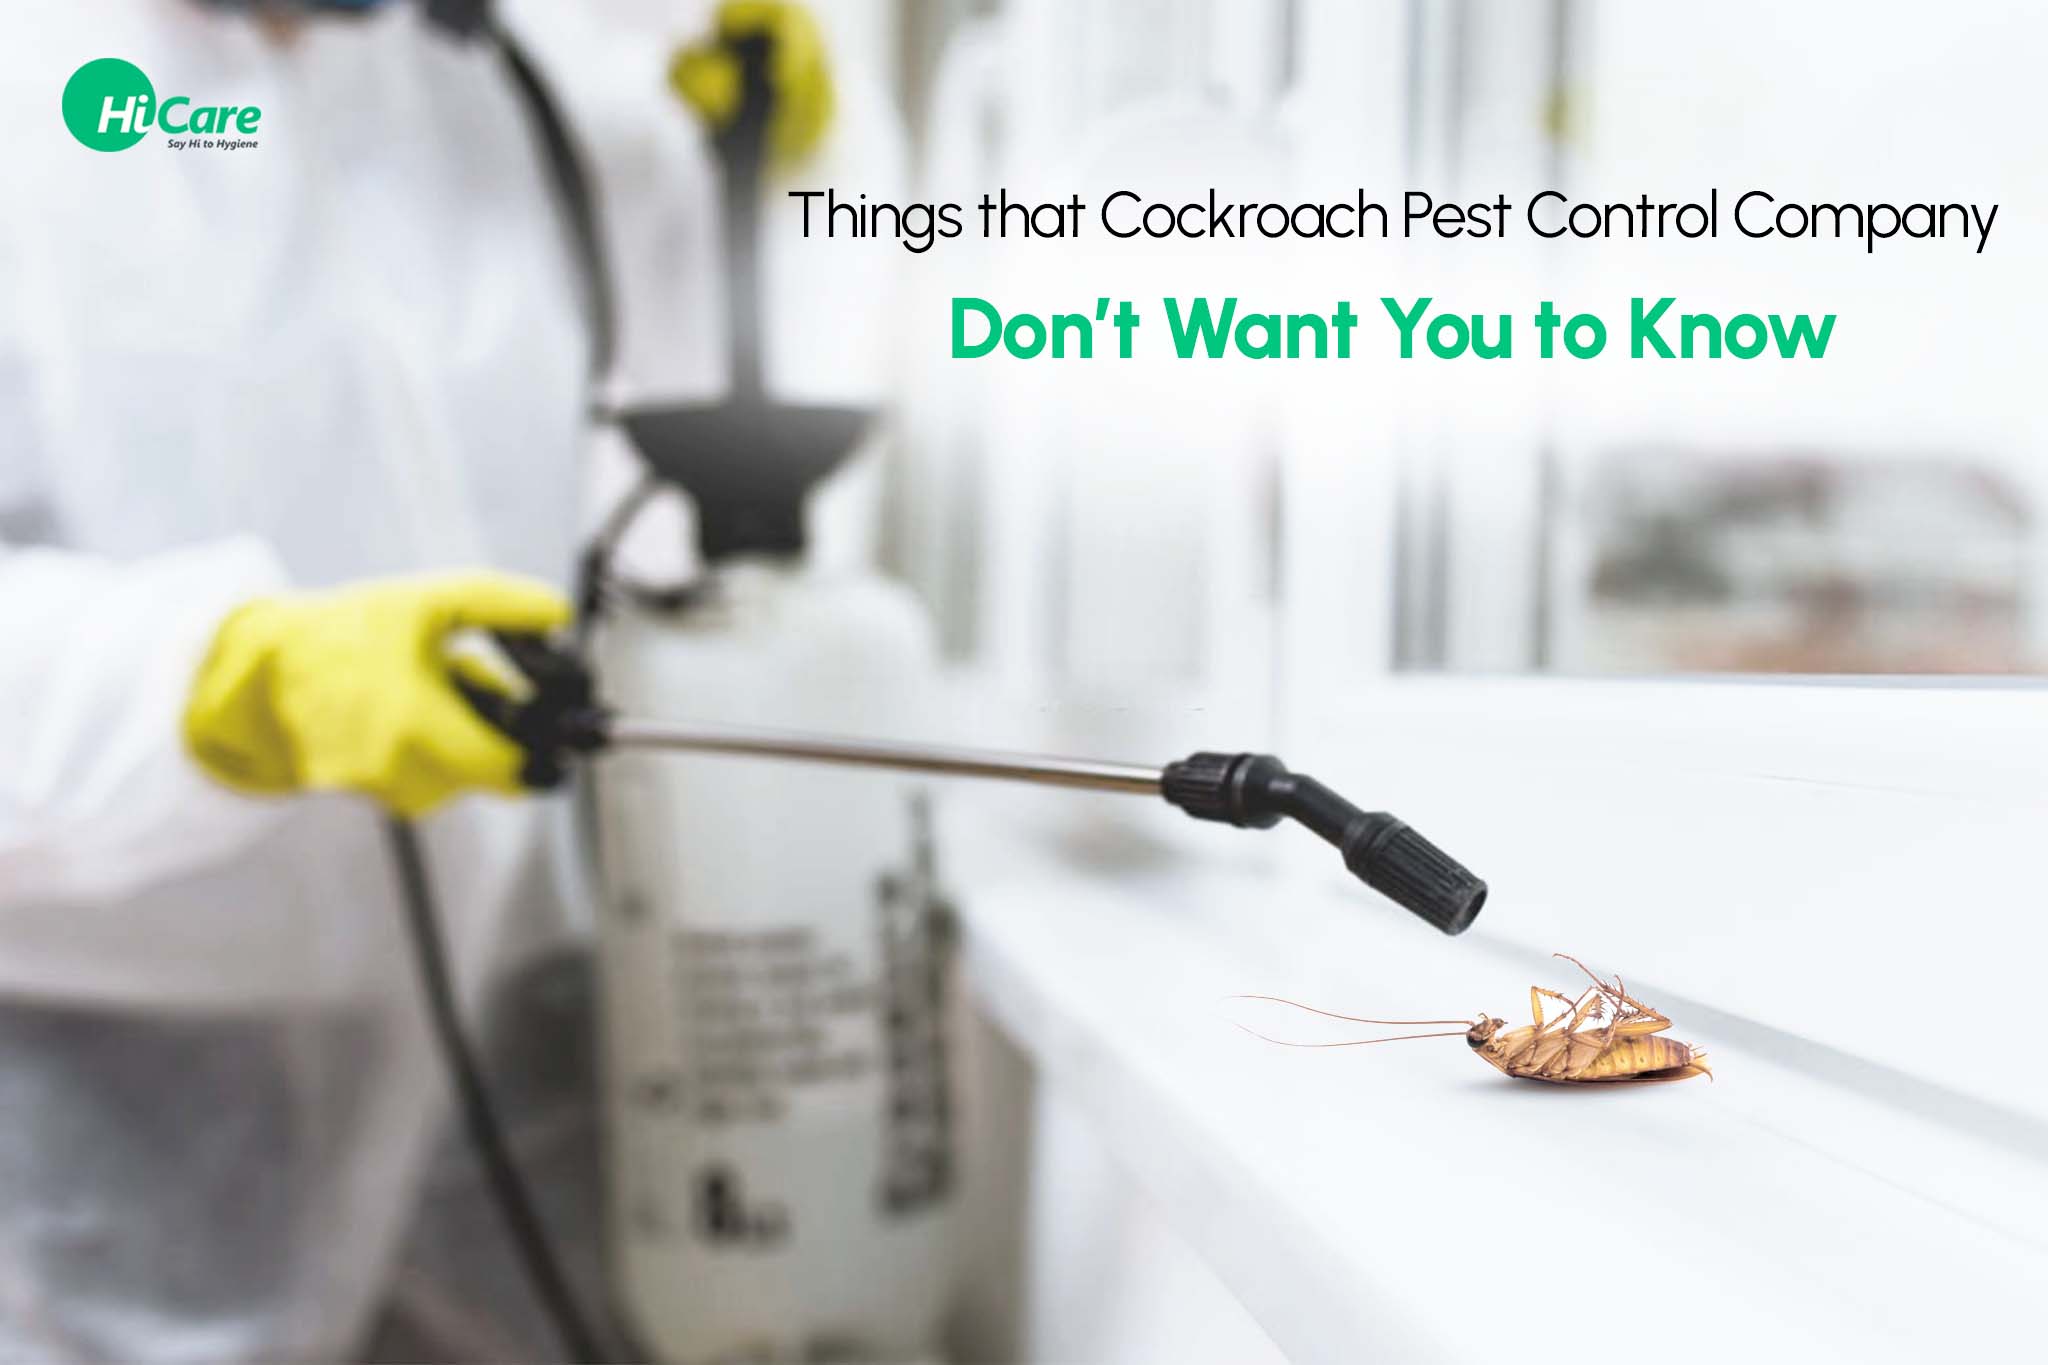 Things that Cockroach Pest Control Company Don’t Want You to Know